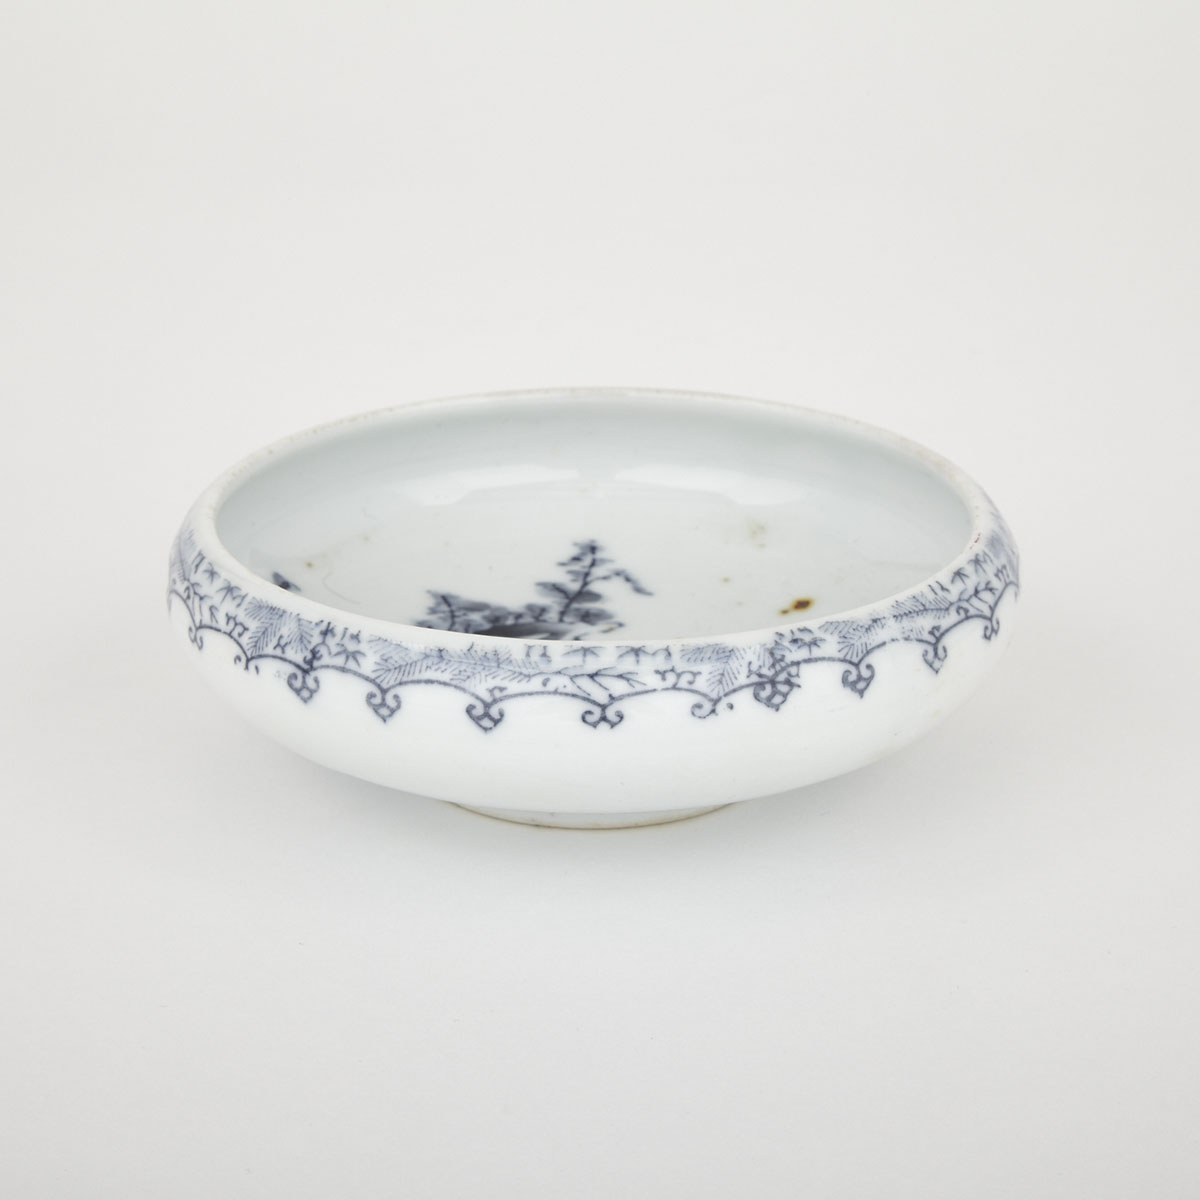 Small Blue and White Japanese Dish